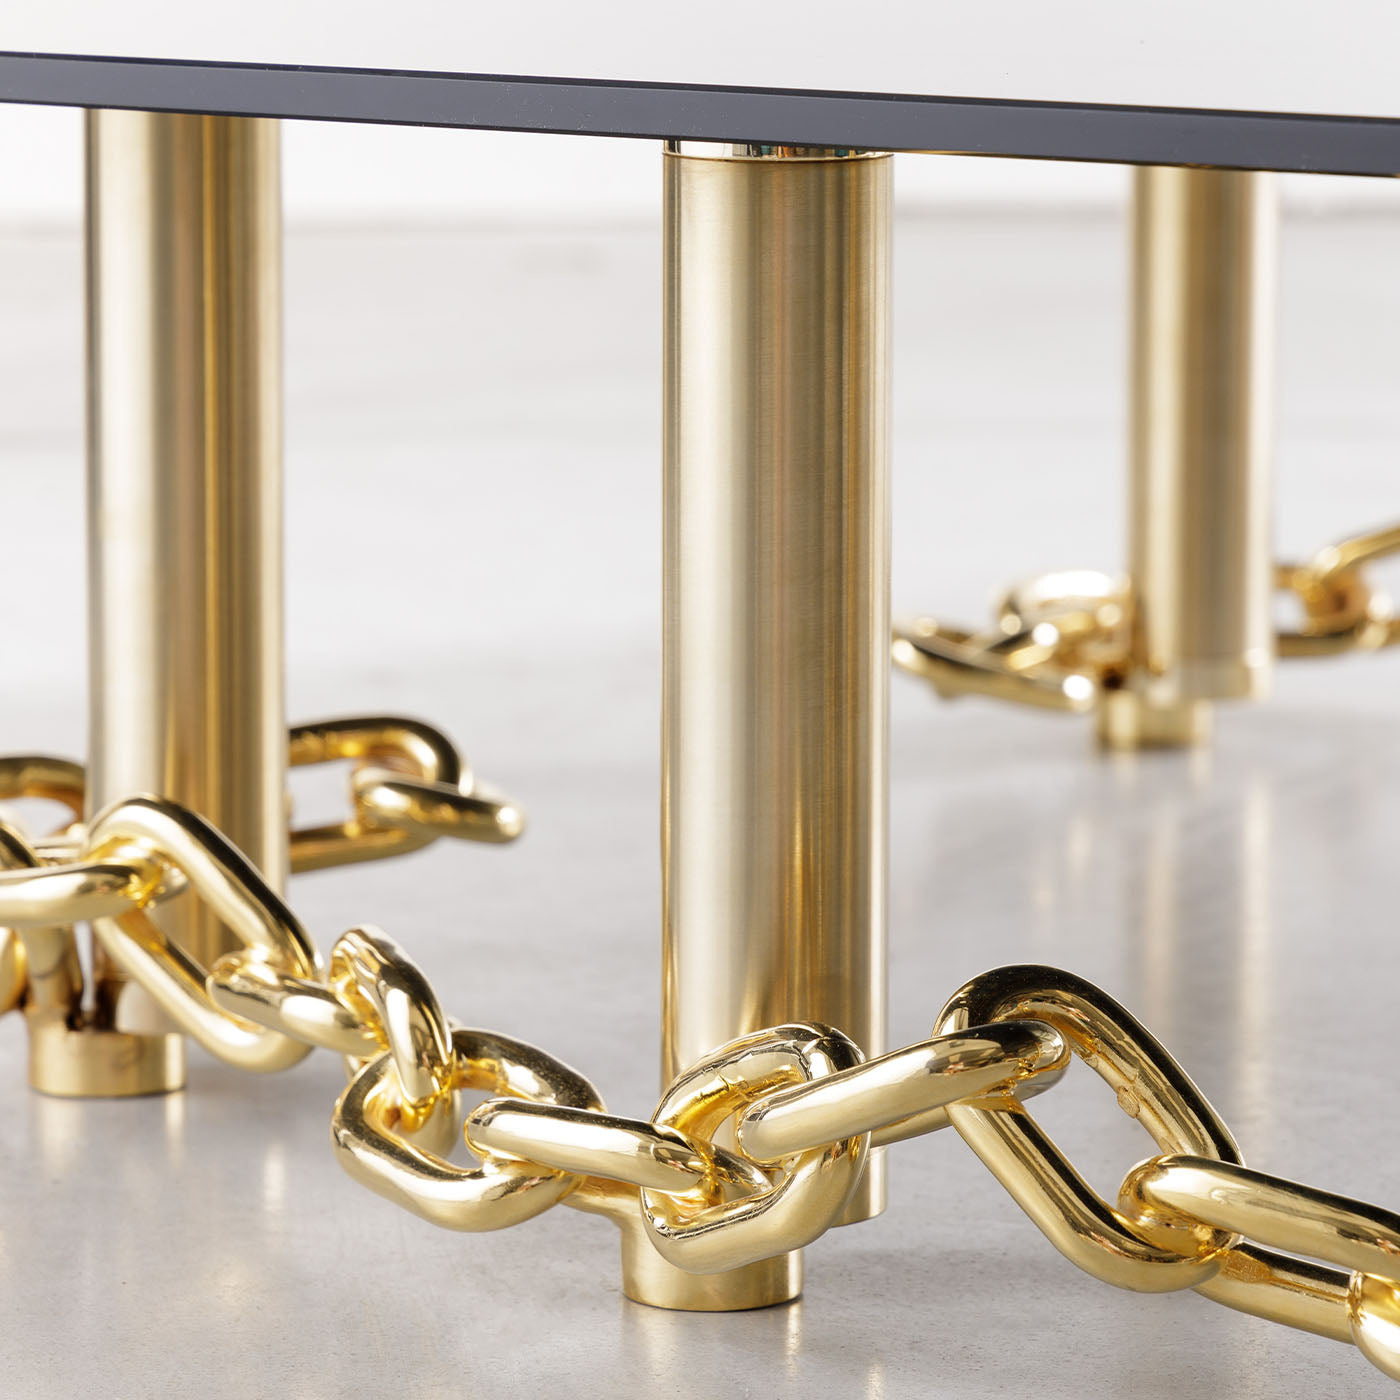 T2231 Golden Chain Coffee Table - Alternative view 2